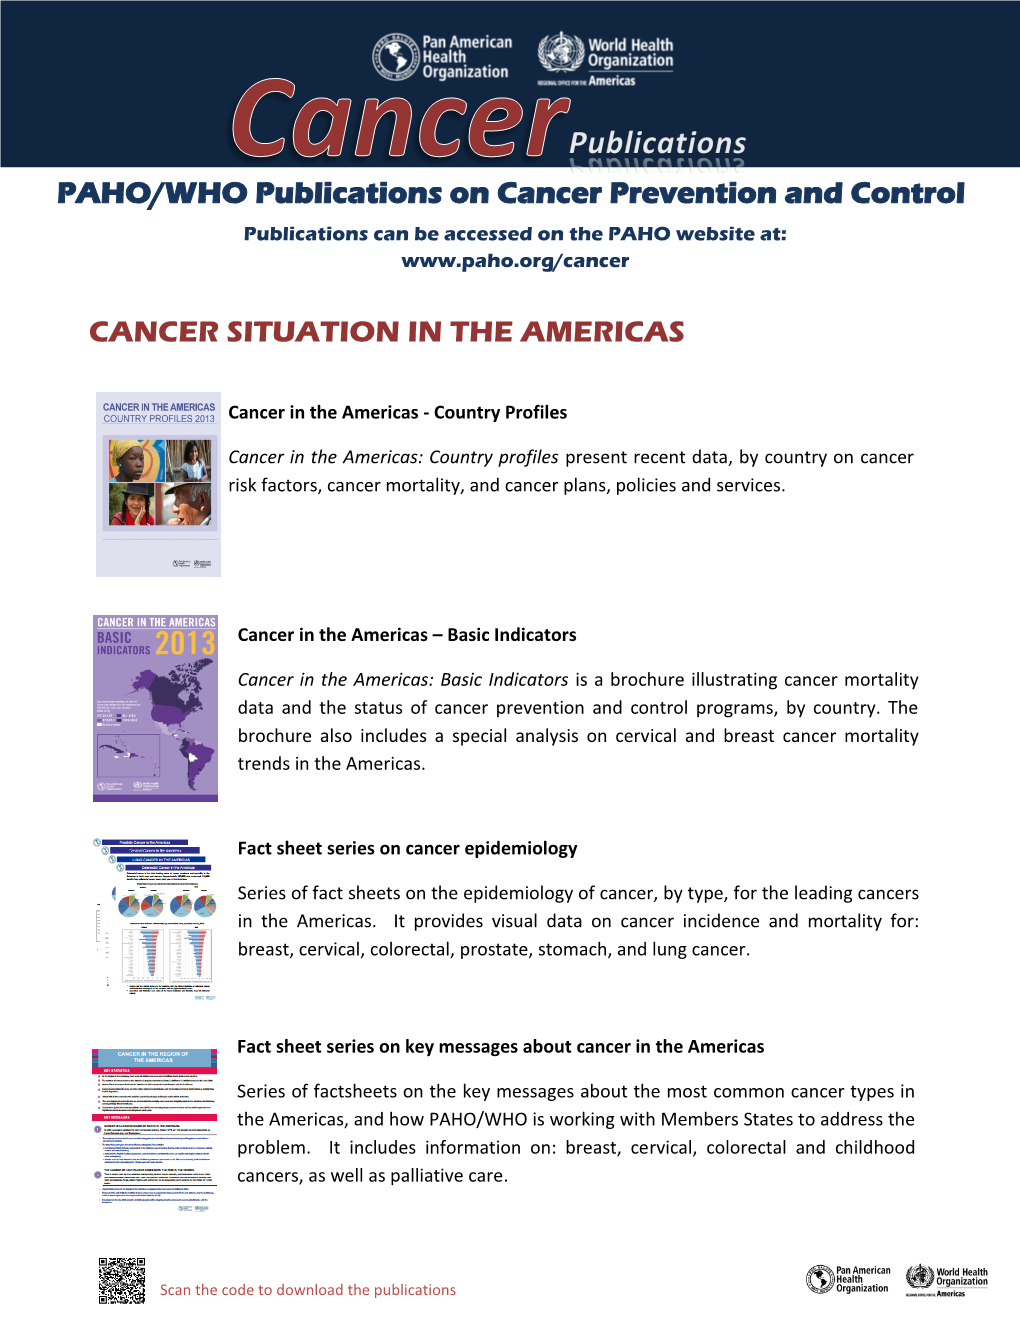 PAHO/WHO Publications on Cancer Prevention and Control CANCER SITUATION in the AMERICAS